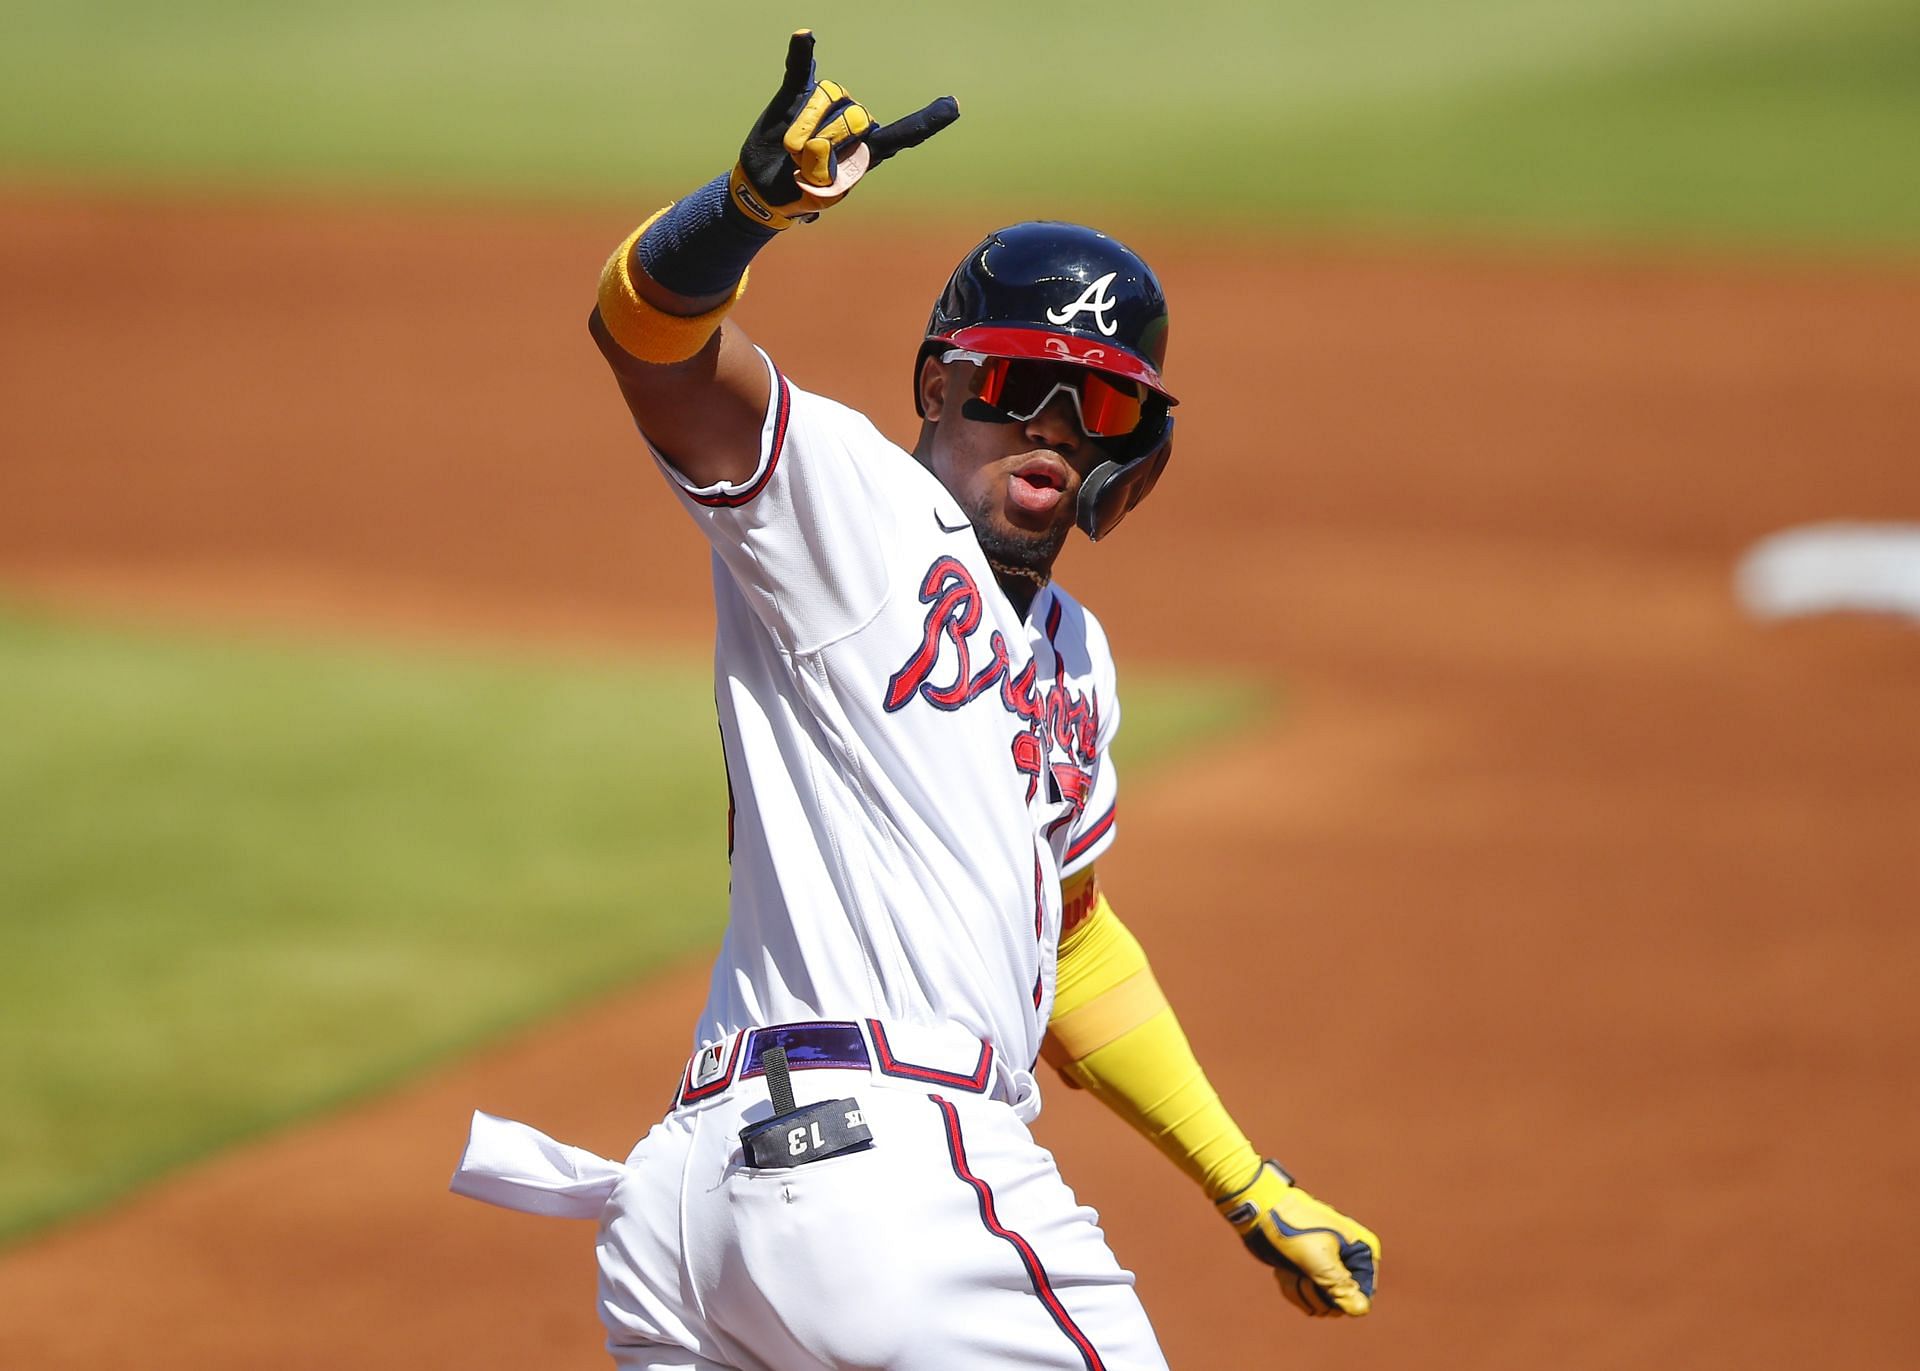 Ronald Acuna Jr.'s All-Star Appearances: How Many Times Was He